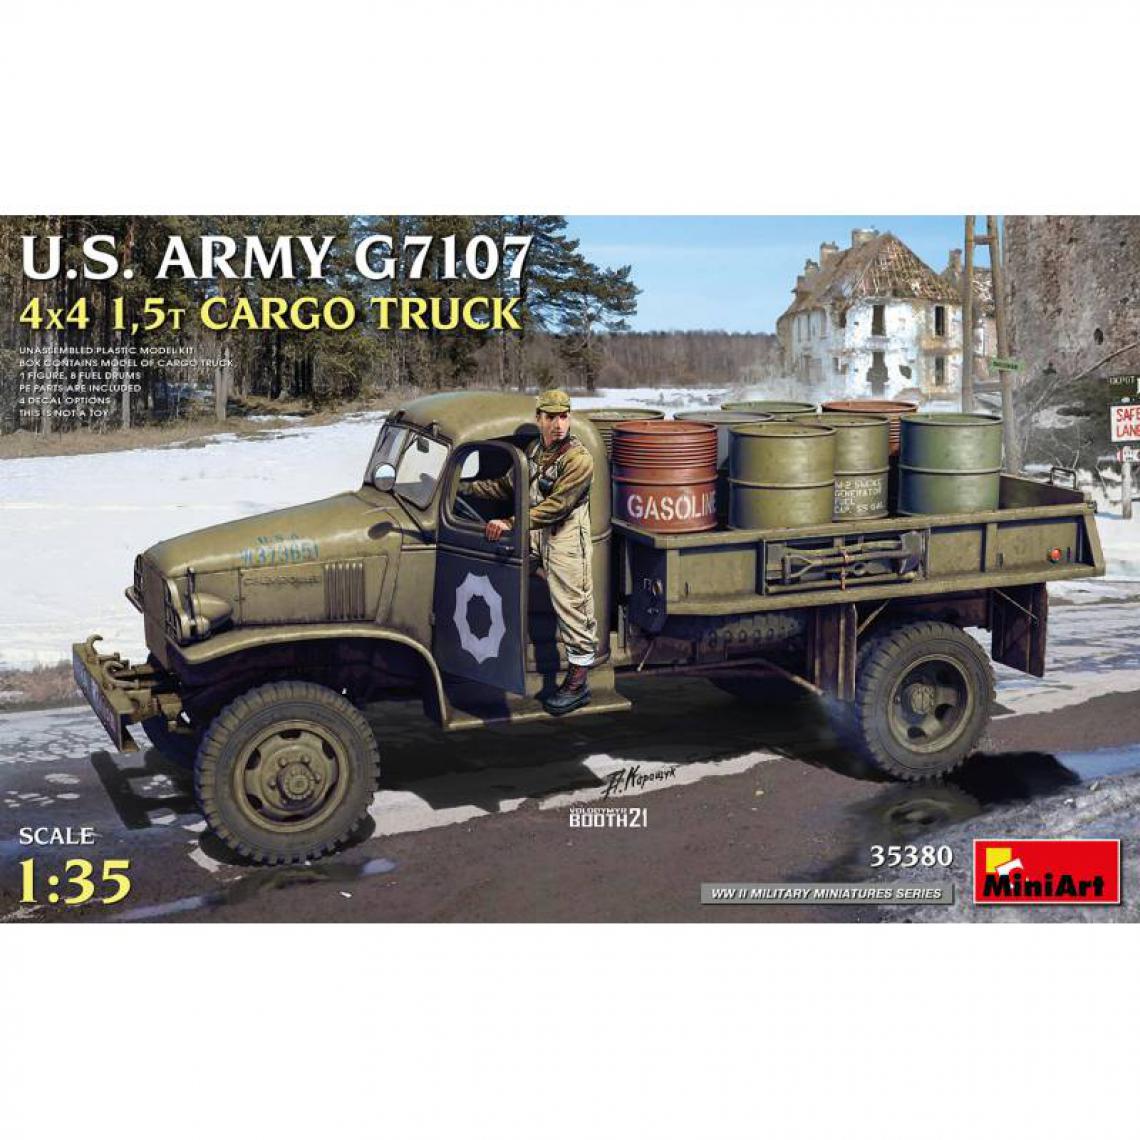 Mini Art - Maquette Camion U.s. Army G7107 4x4 1,5t Cargo Truck - Camions